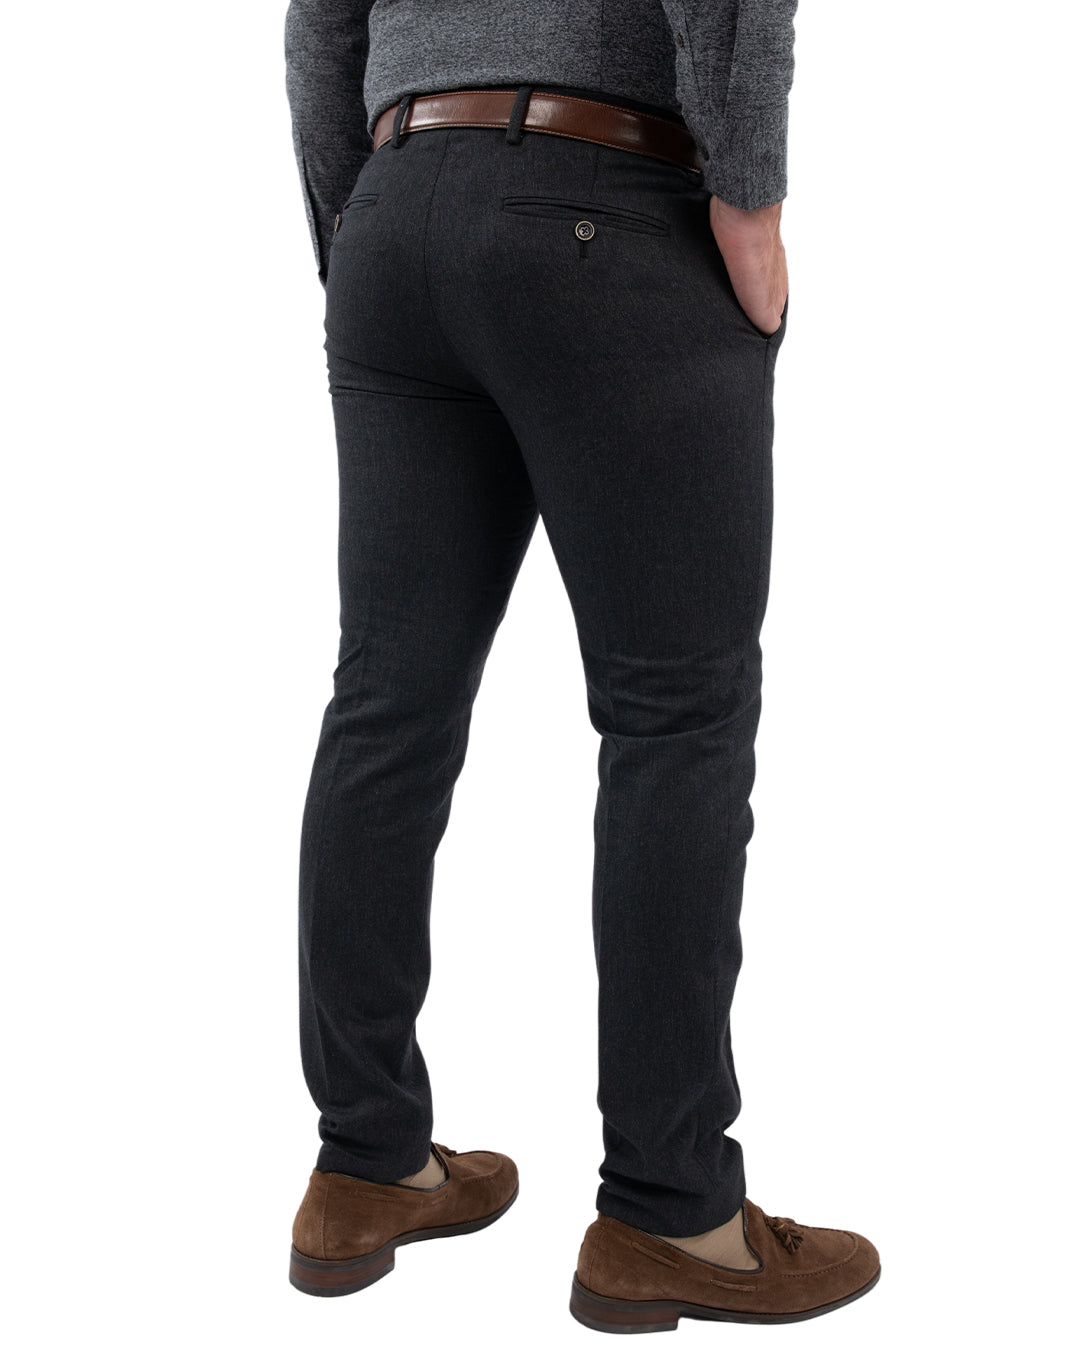 Charcoal Wool Blend Stretch Trousers